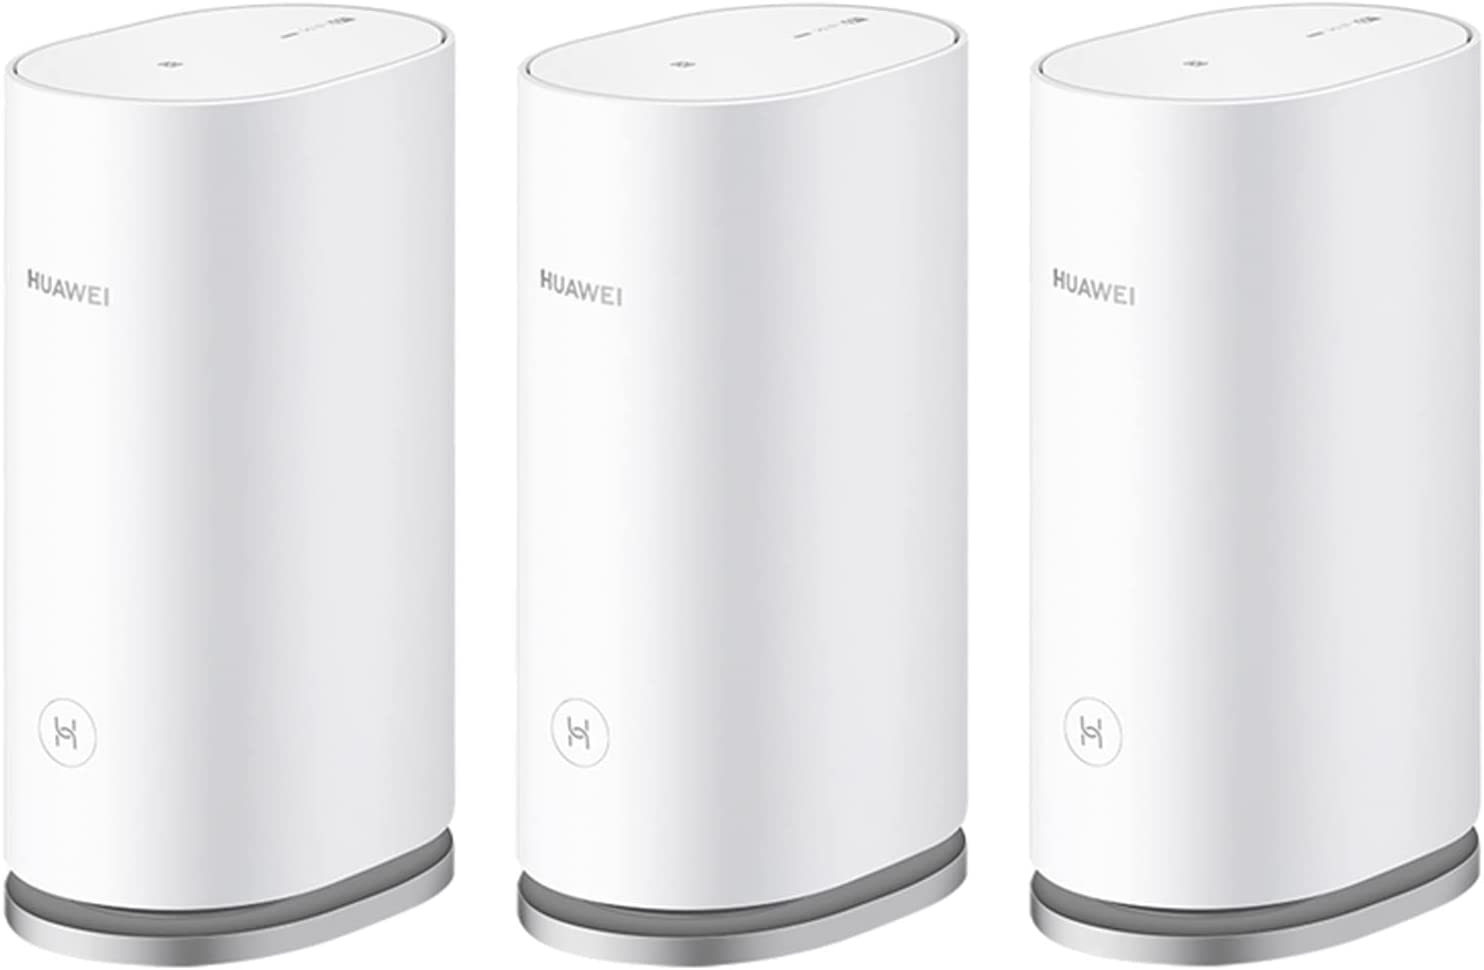 HUAWEI WiFi Mesh 3 - Router, Wi-Fi 6+, 3000 Mbps, 2.4GHz & 5GHz, Blanco (Paquete x2 Router), WS8100